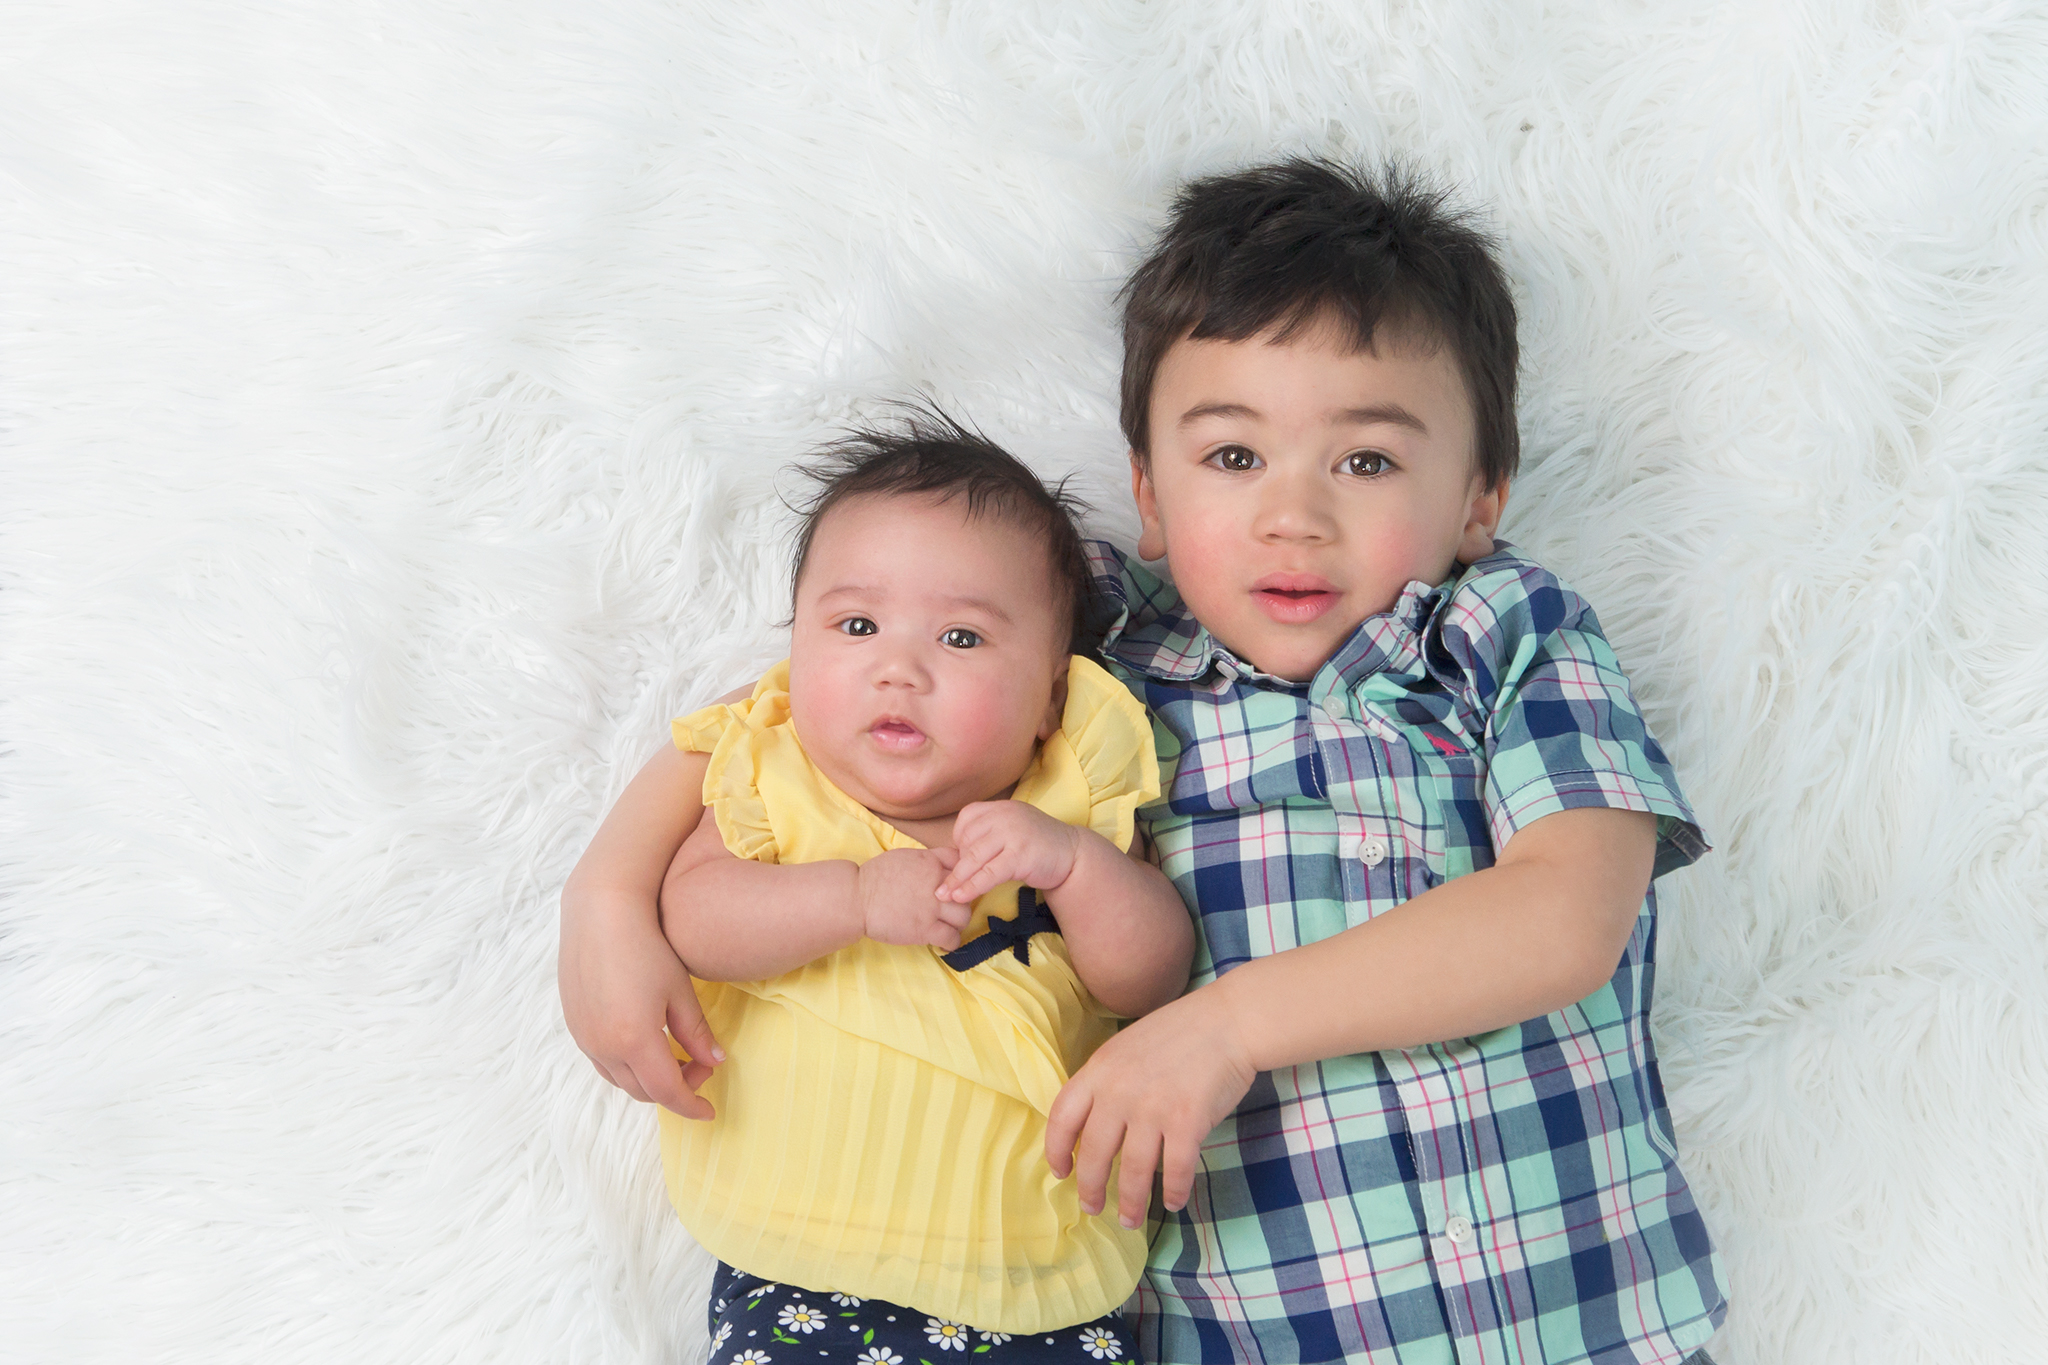 Sibling Session, Baby, Child, Photography, Session, Casi Ann Photography, studio, Mother's Day, Grandma, Milestone, brother, sister, school, preschool, 2 month, white, flowers, ingleside, illinois, portrait, kids, Secret, Surprise, For Mom